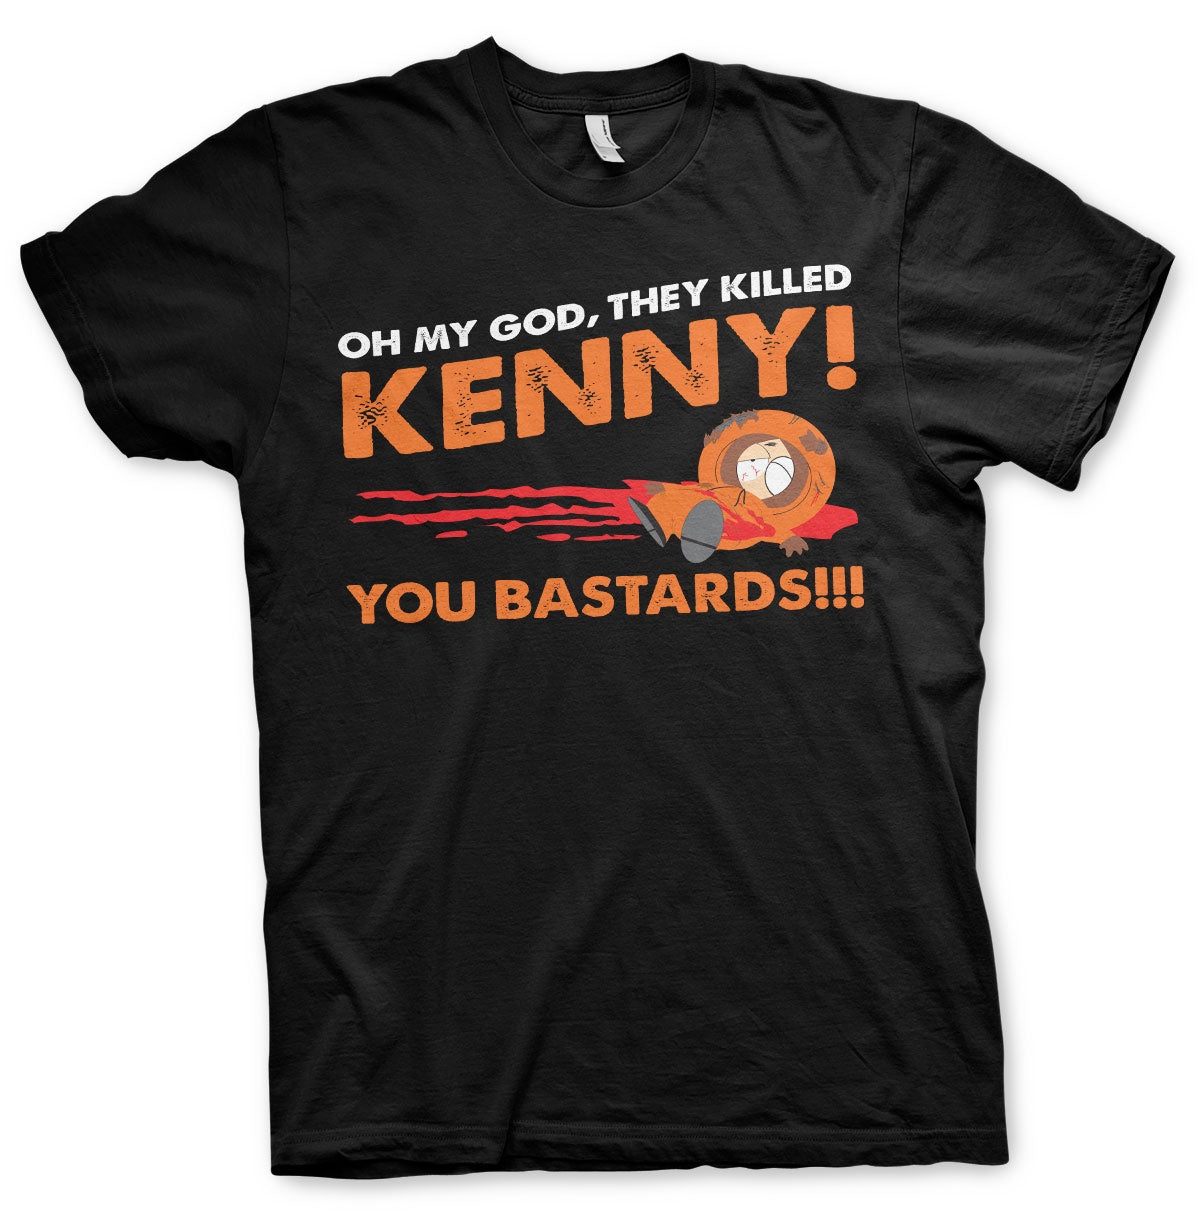 SOUTH PARK - They Killed Kenny T-Shirt